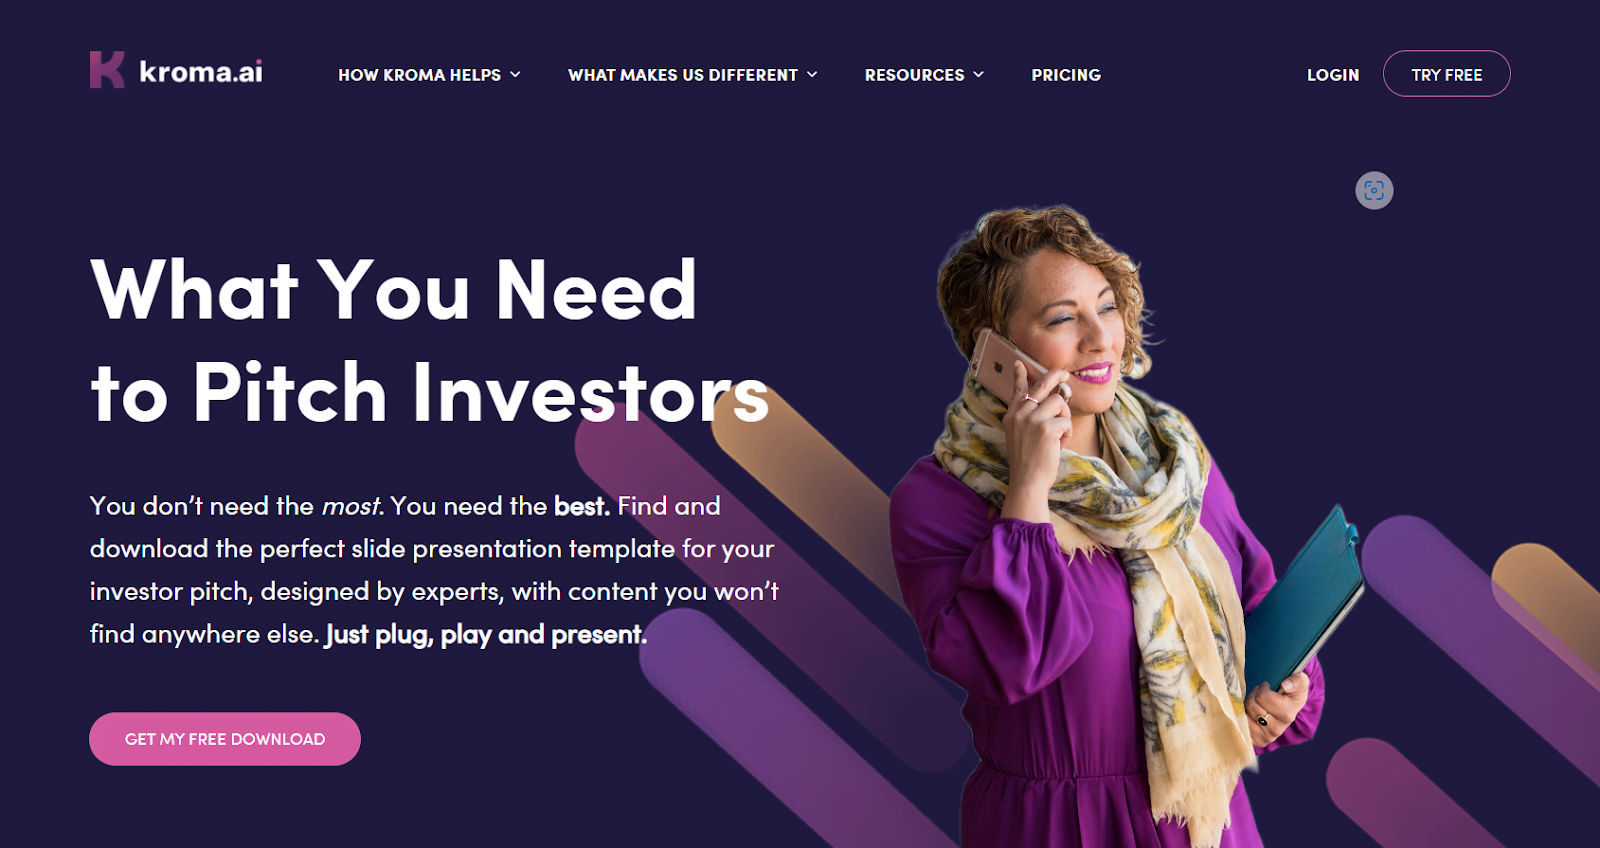 kroma ai website - what you need to pitch investors